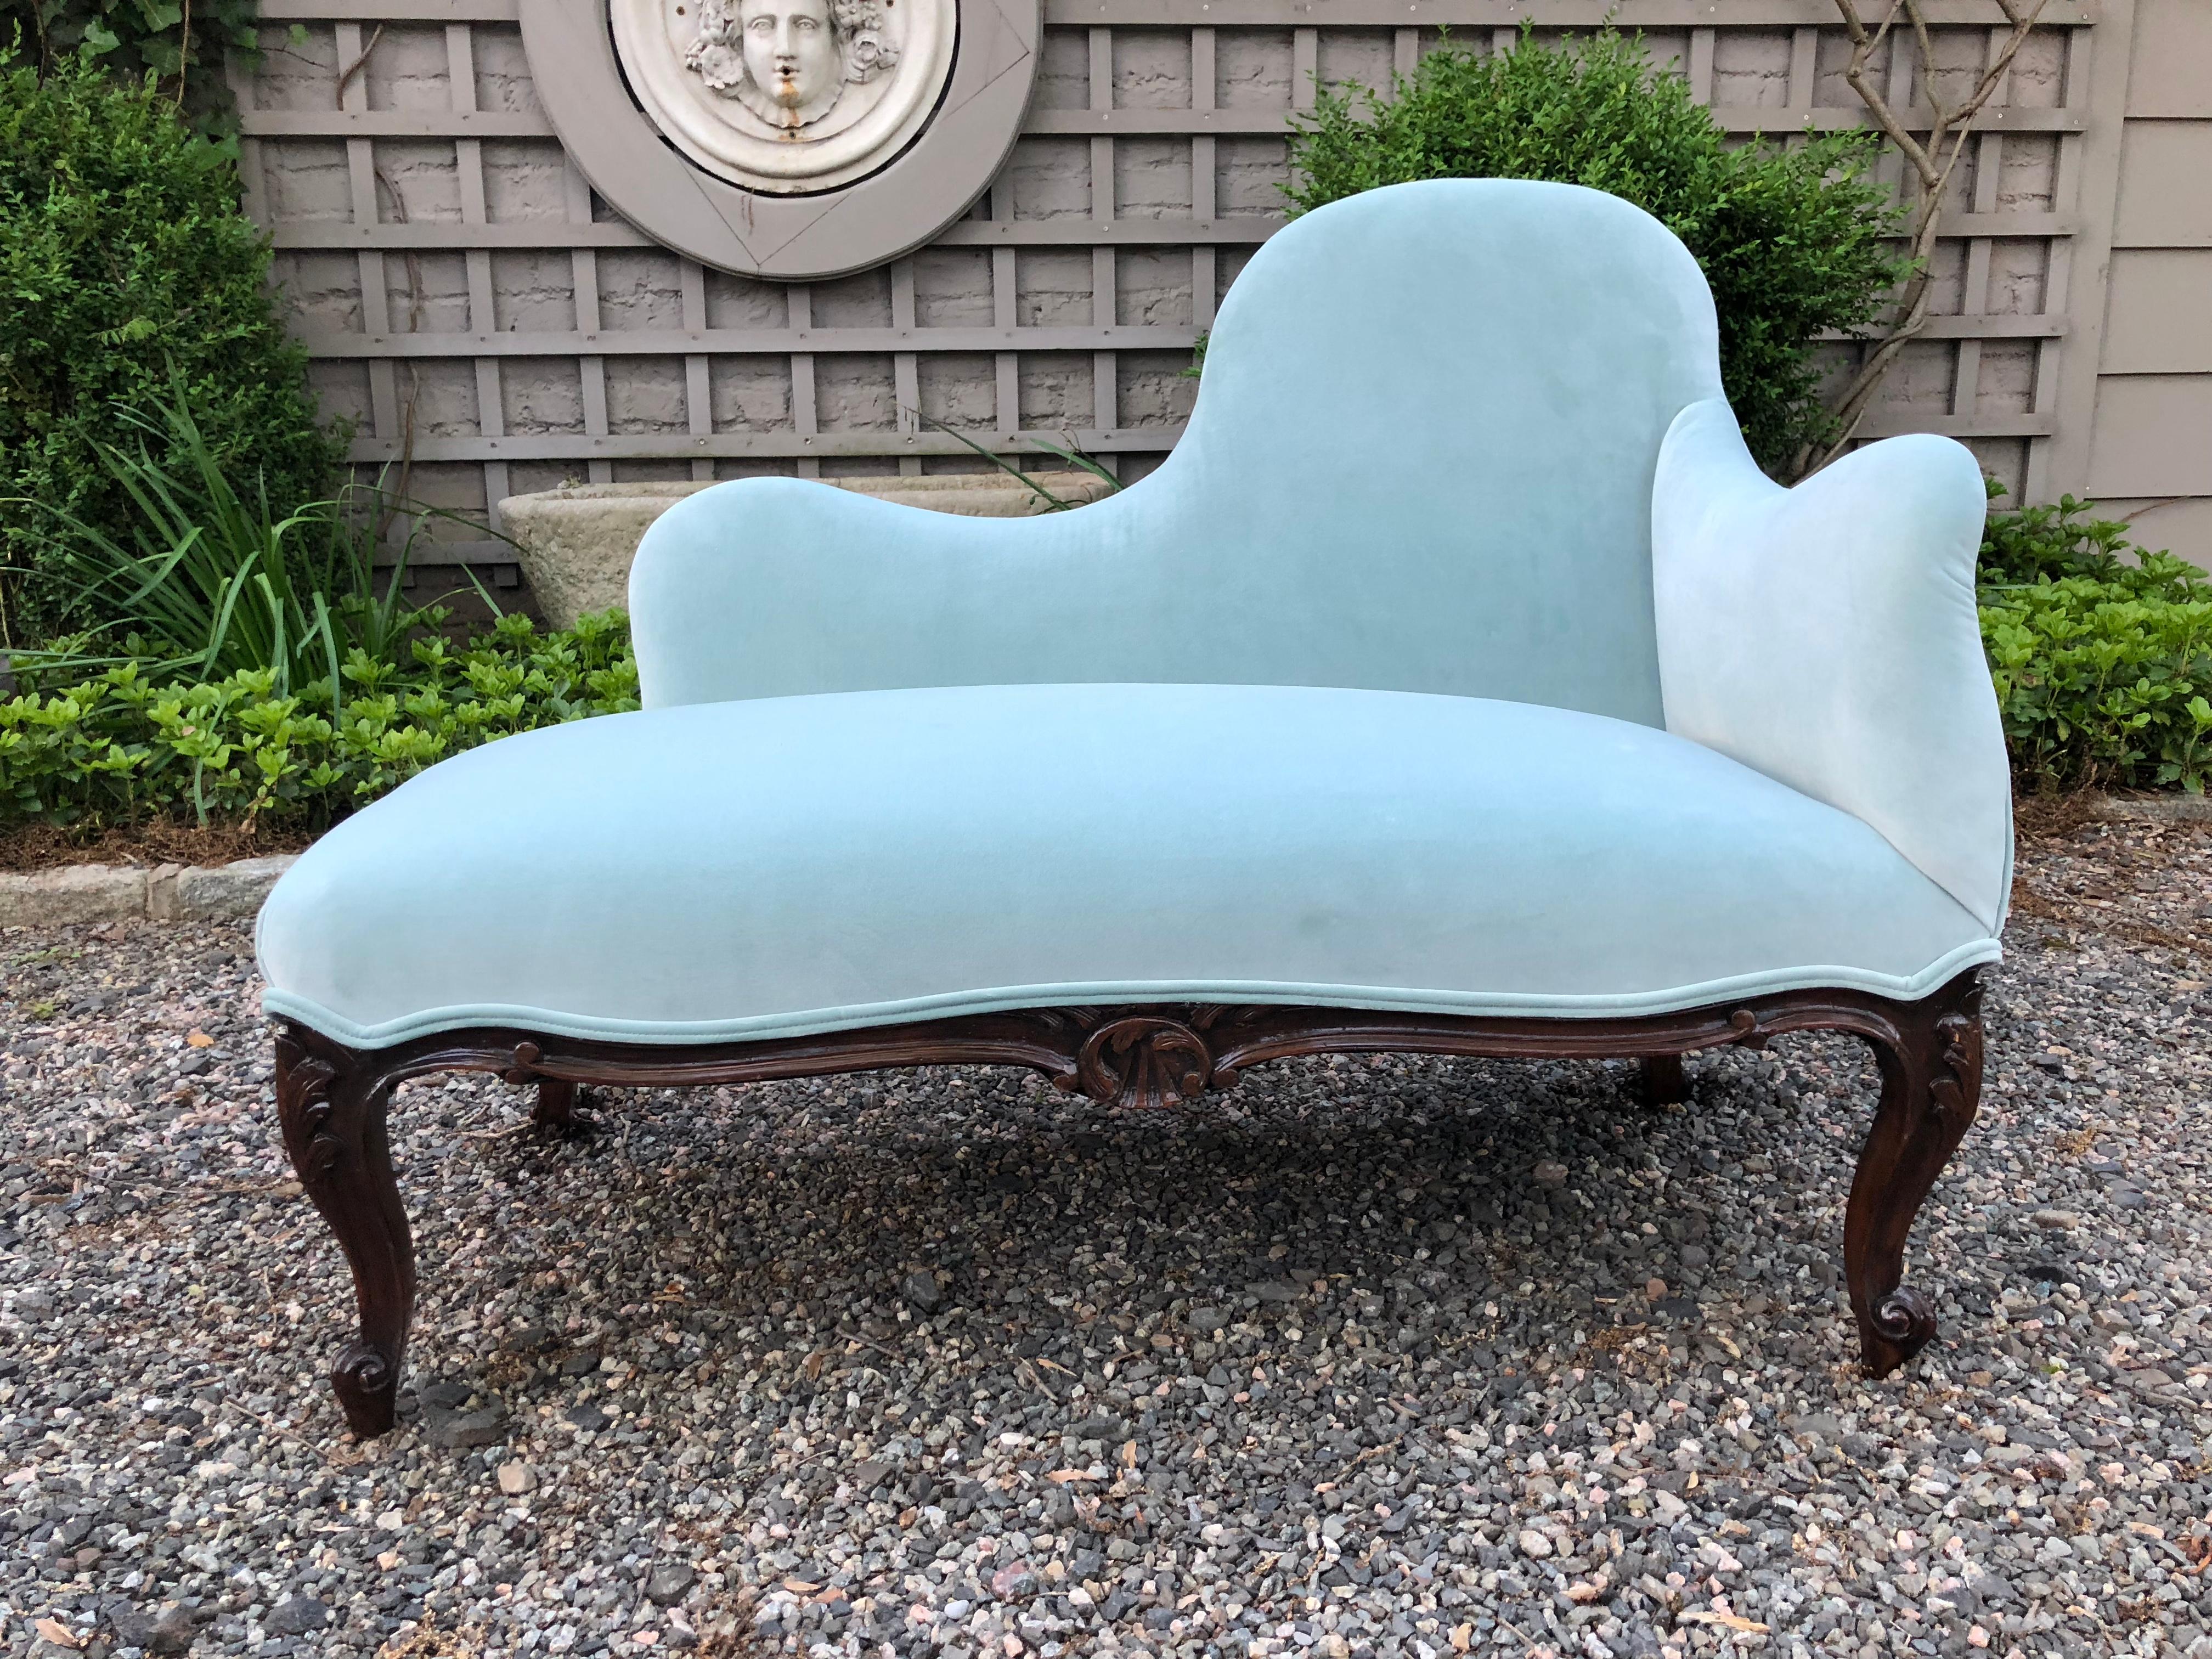 Very pretty vintage settee newly upholstered in a Tiffany blue cotton velvet. Curved back and diminutive size make this perfect for a bedroom or hallway. Measure: Seat height is 16.